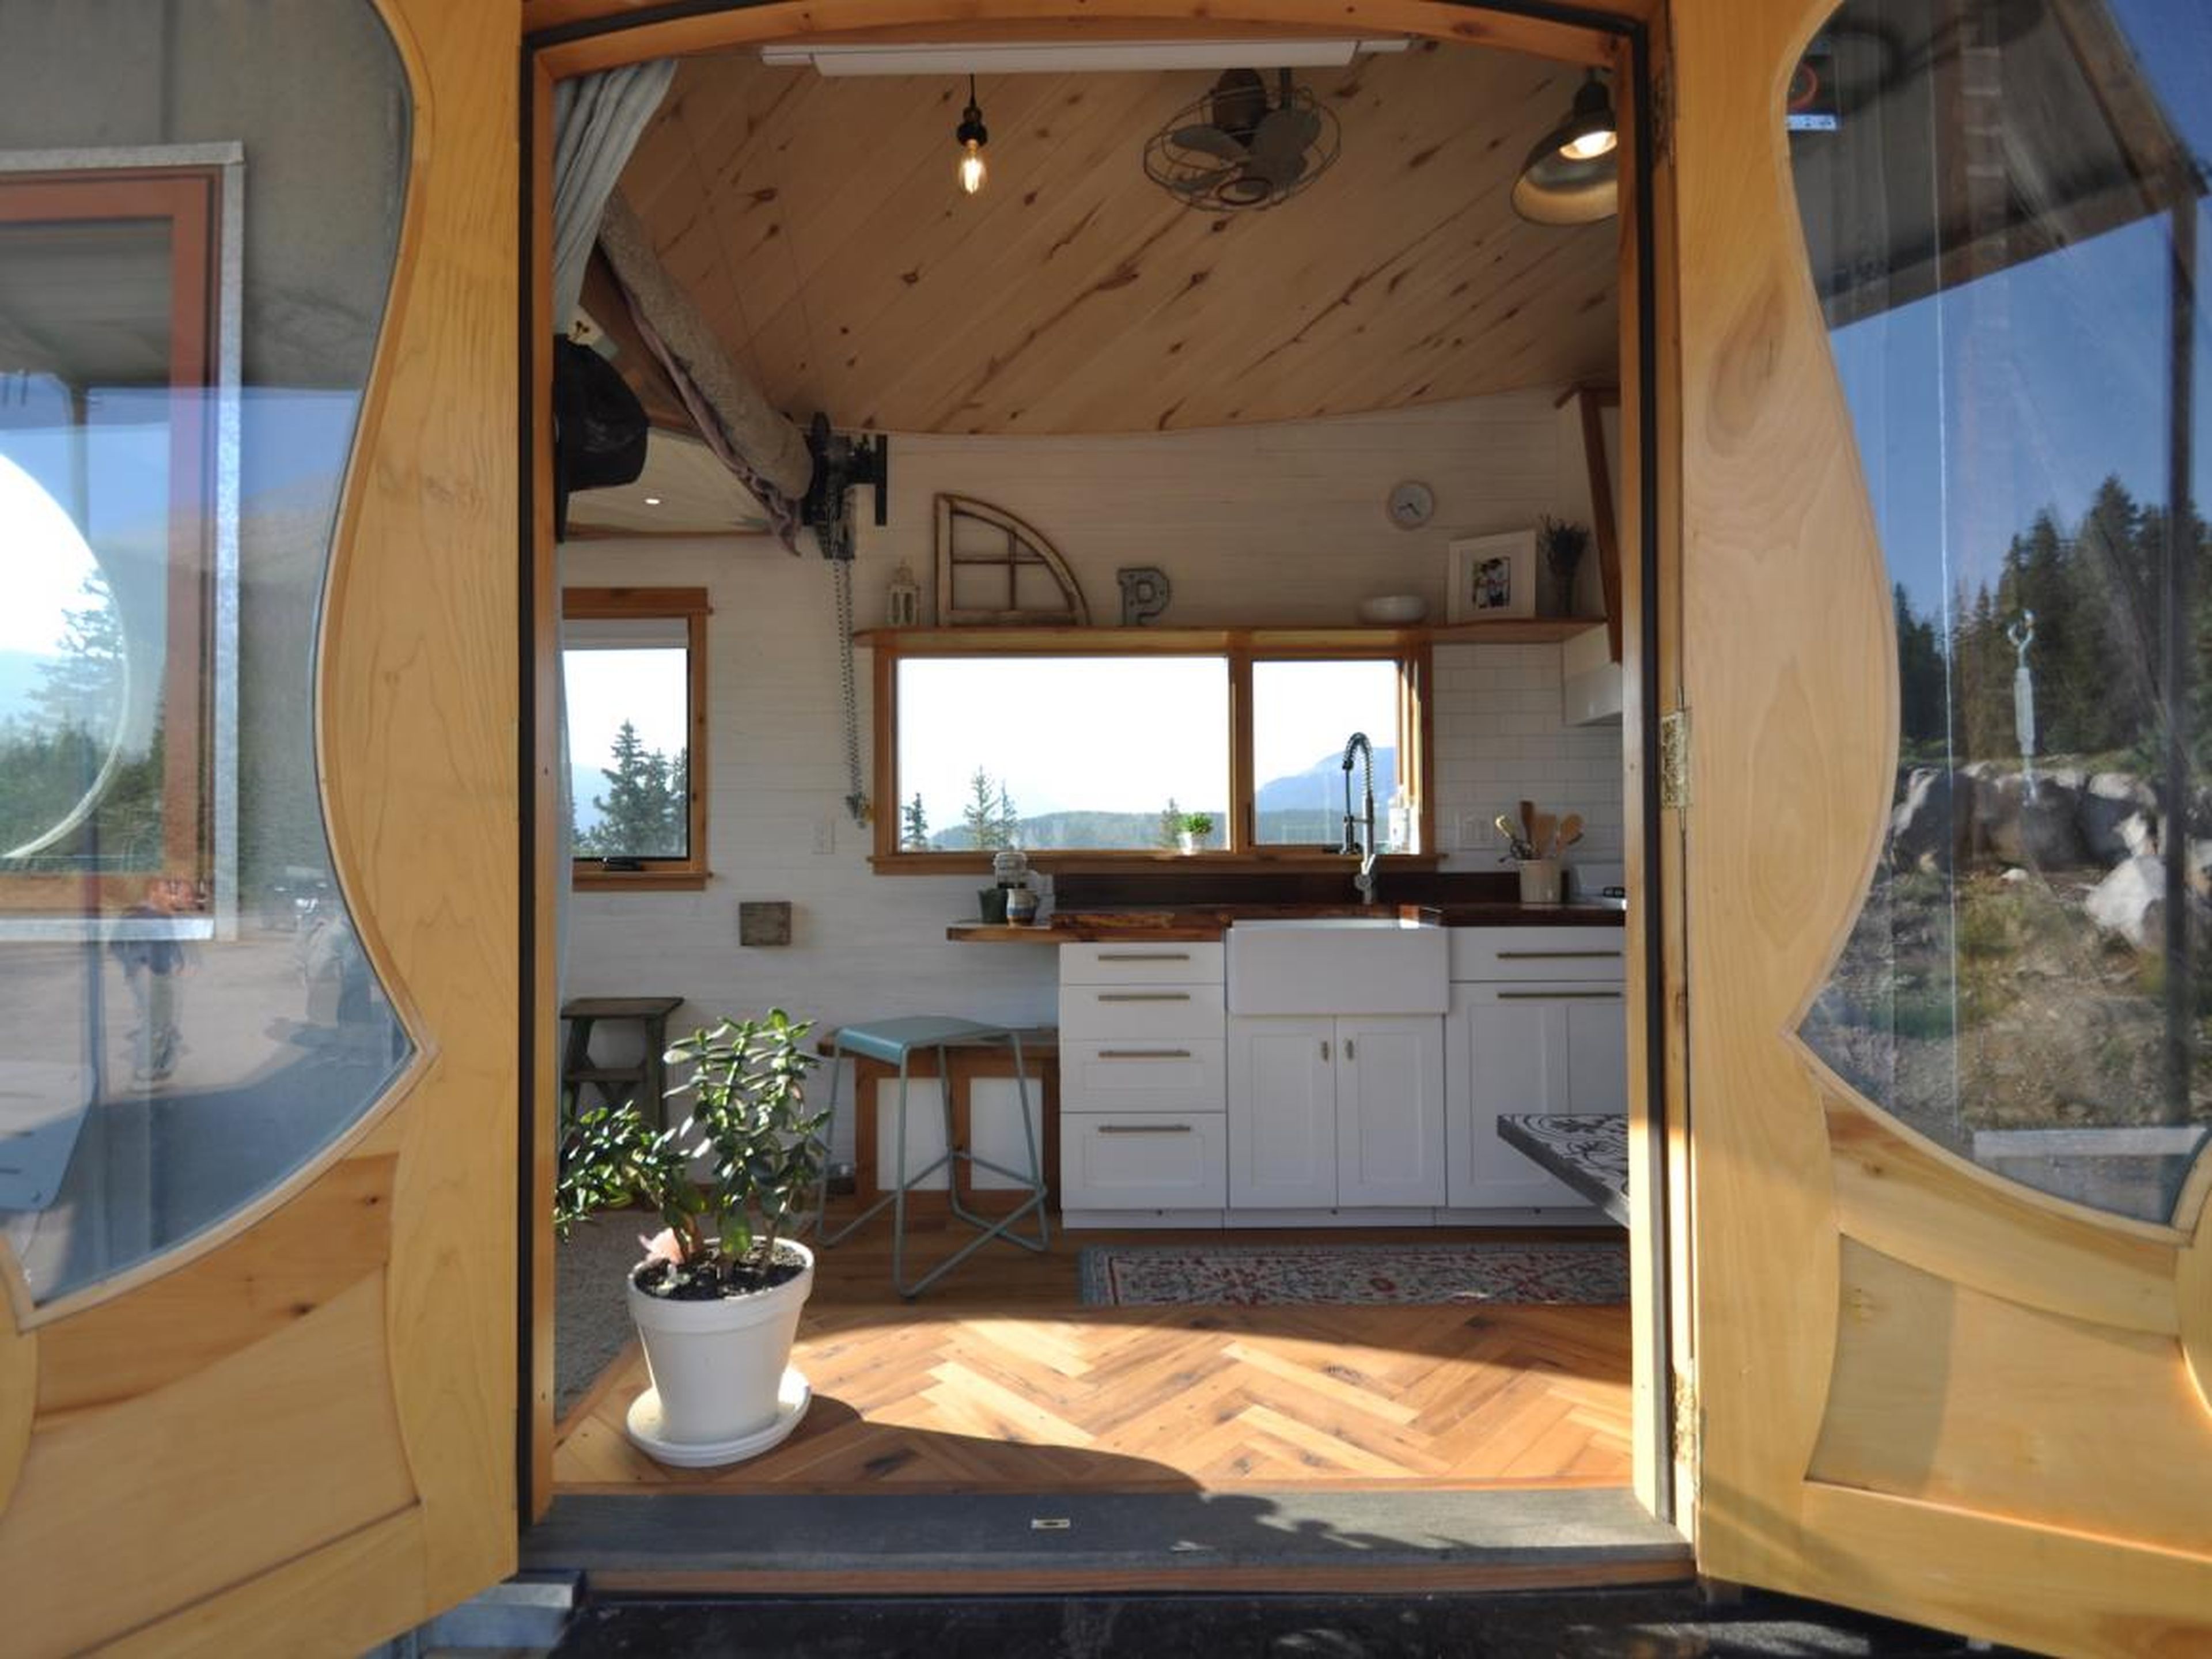 Parham made his own tiny house "extra special" for trade shows. While he has a knack for macro-decisions, like roof shape and overall floor plan, his wife, Stephanie, has an eye for micro-details.